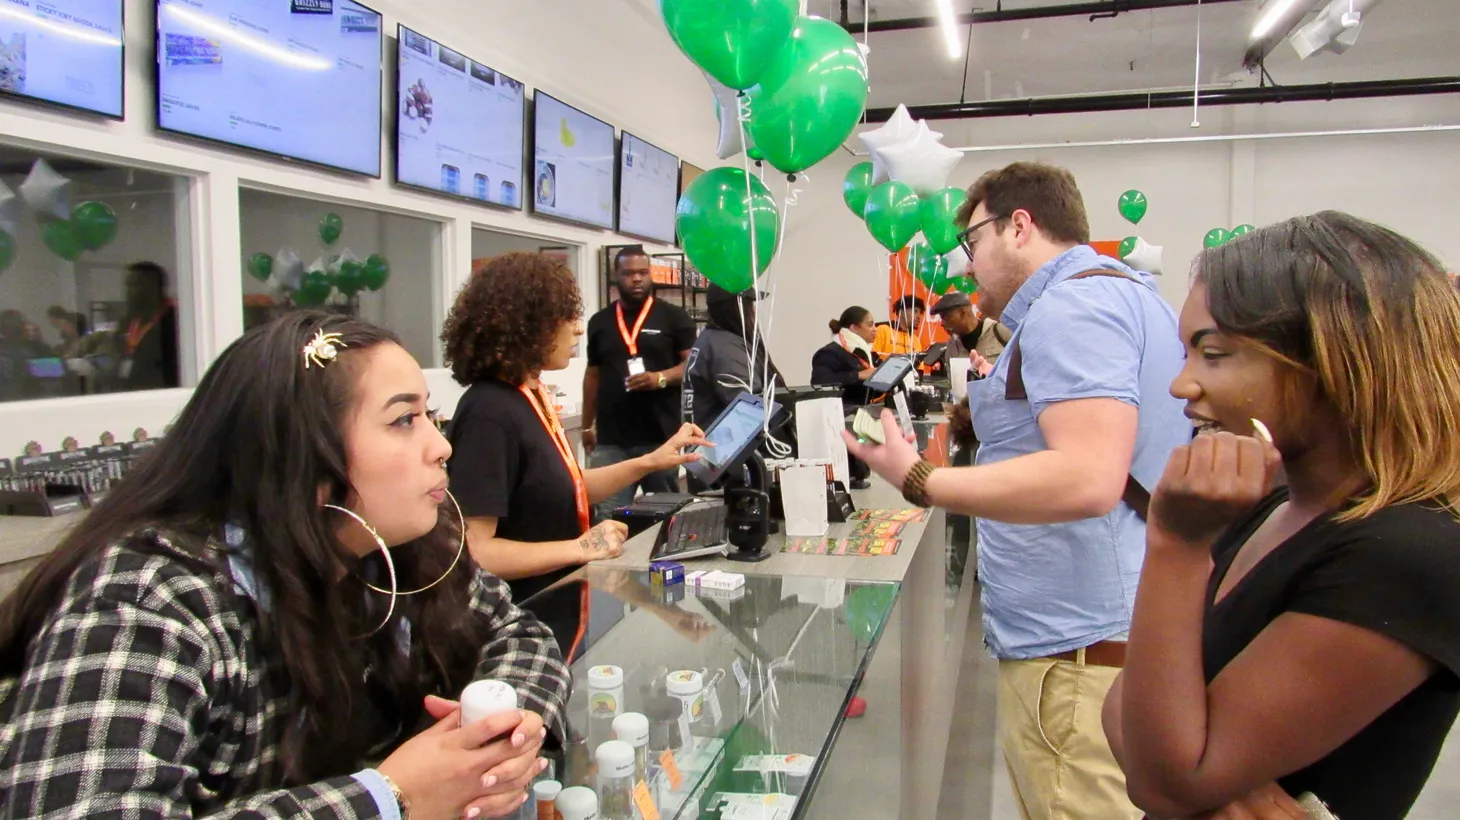 A “budtender” speaks to a customer at the grand opening of the Blunts and Moore dispensary in Oakland, CA.